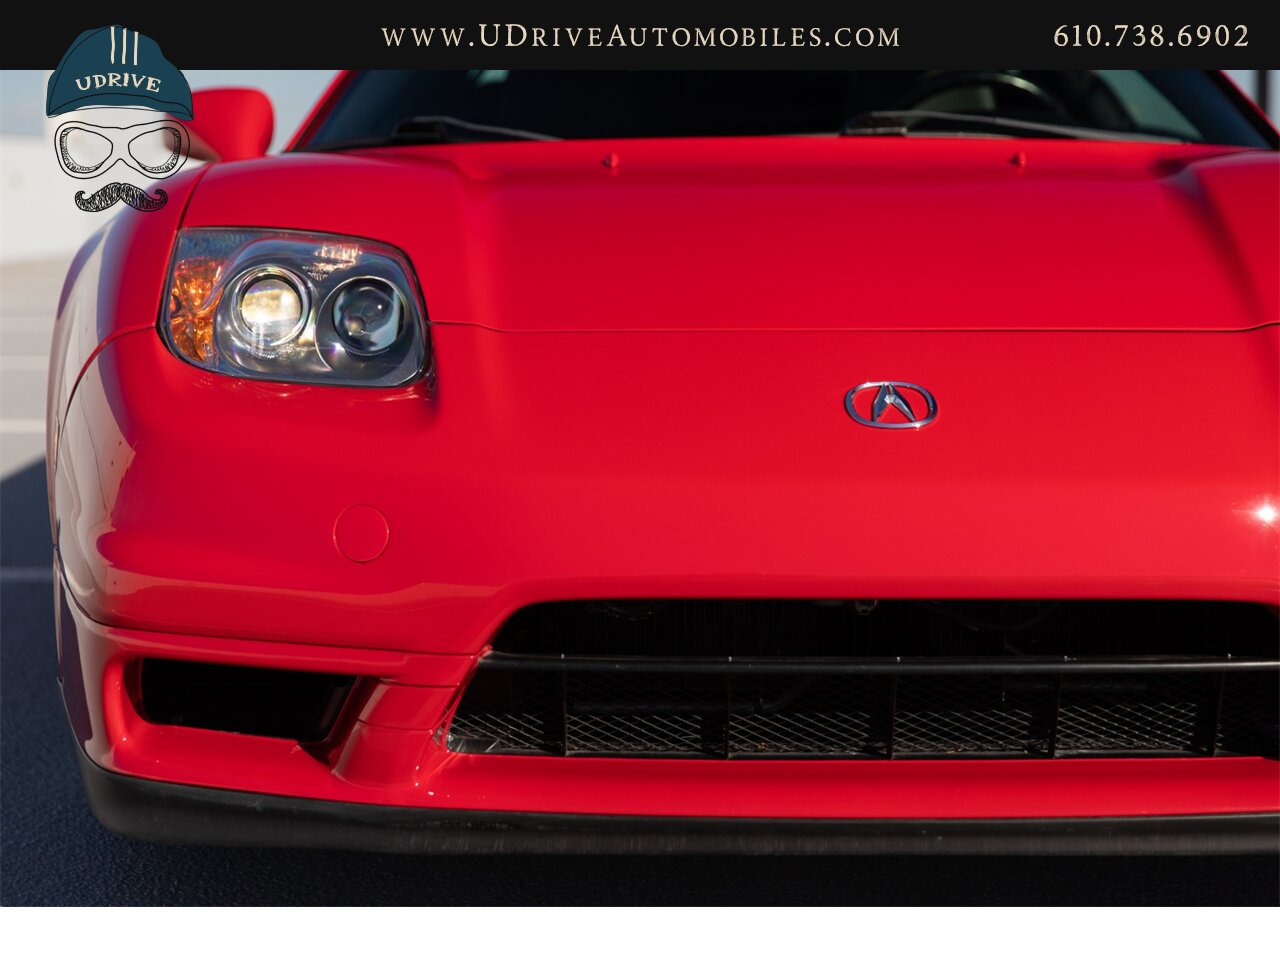 2004 Acura NSX NSX-T 21k mIles Red over Black  Fresh Timing Belt Service - Photo 13 - West Chester, PA 19382